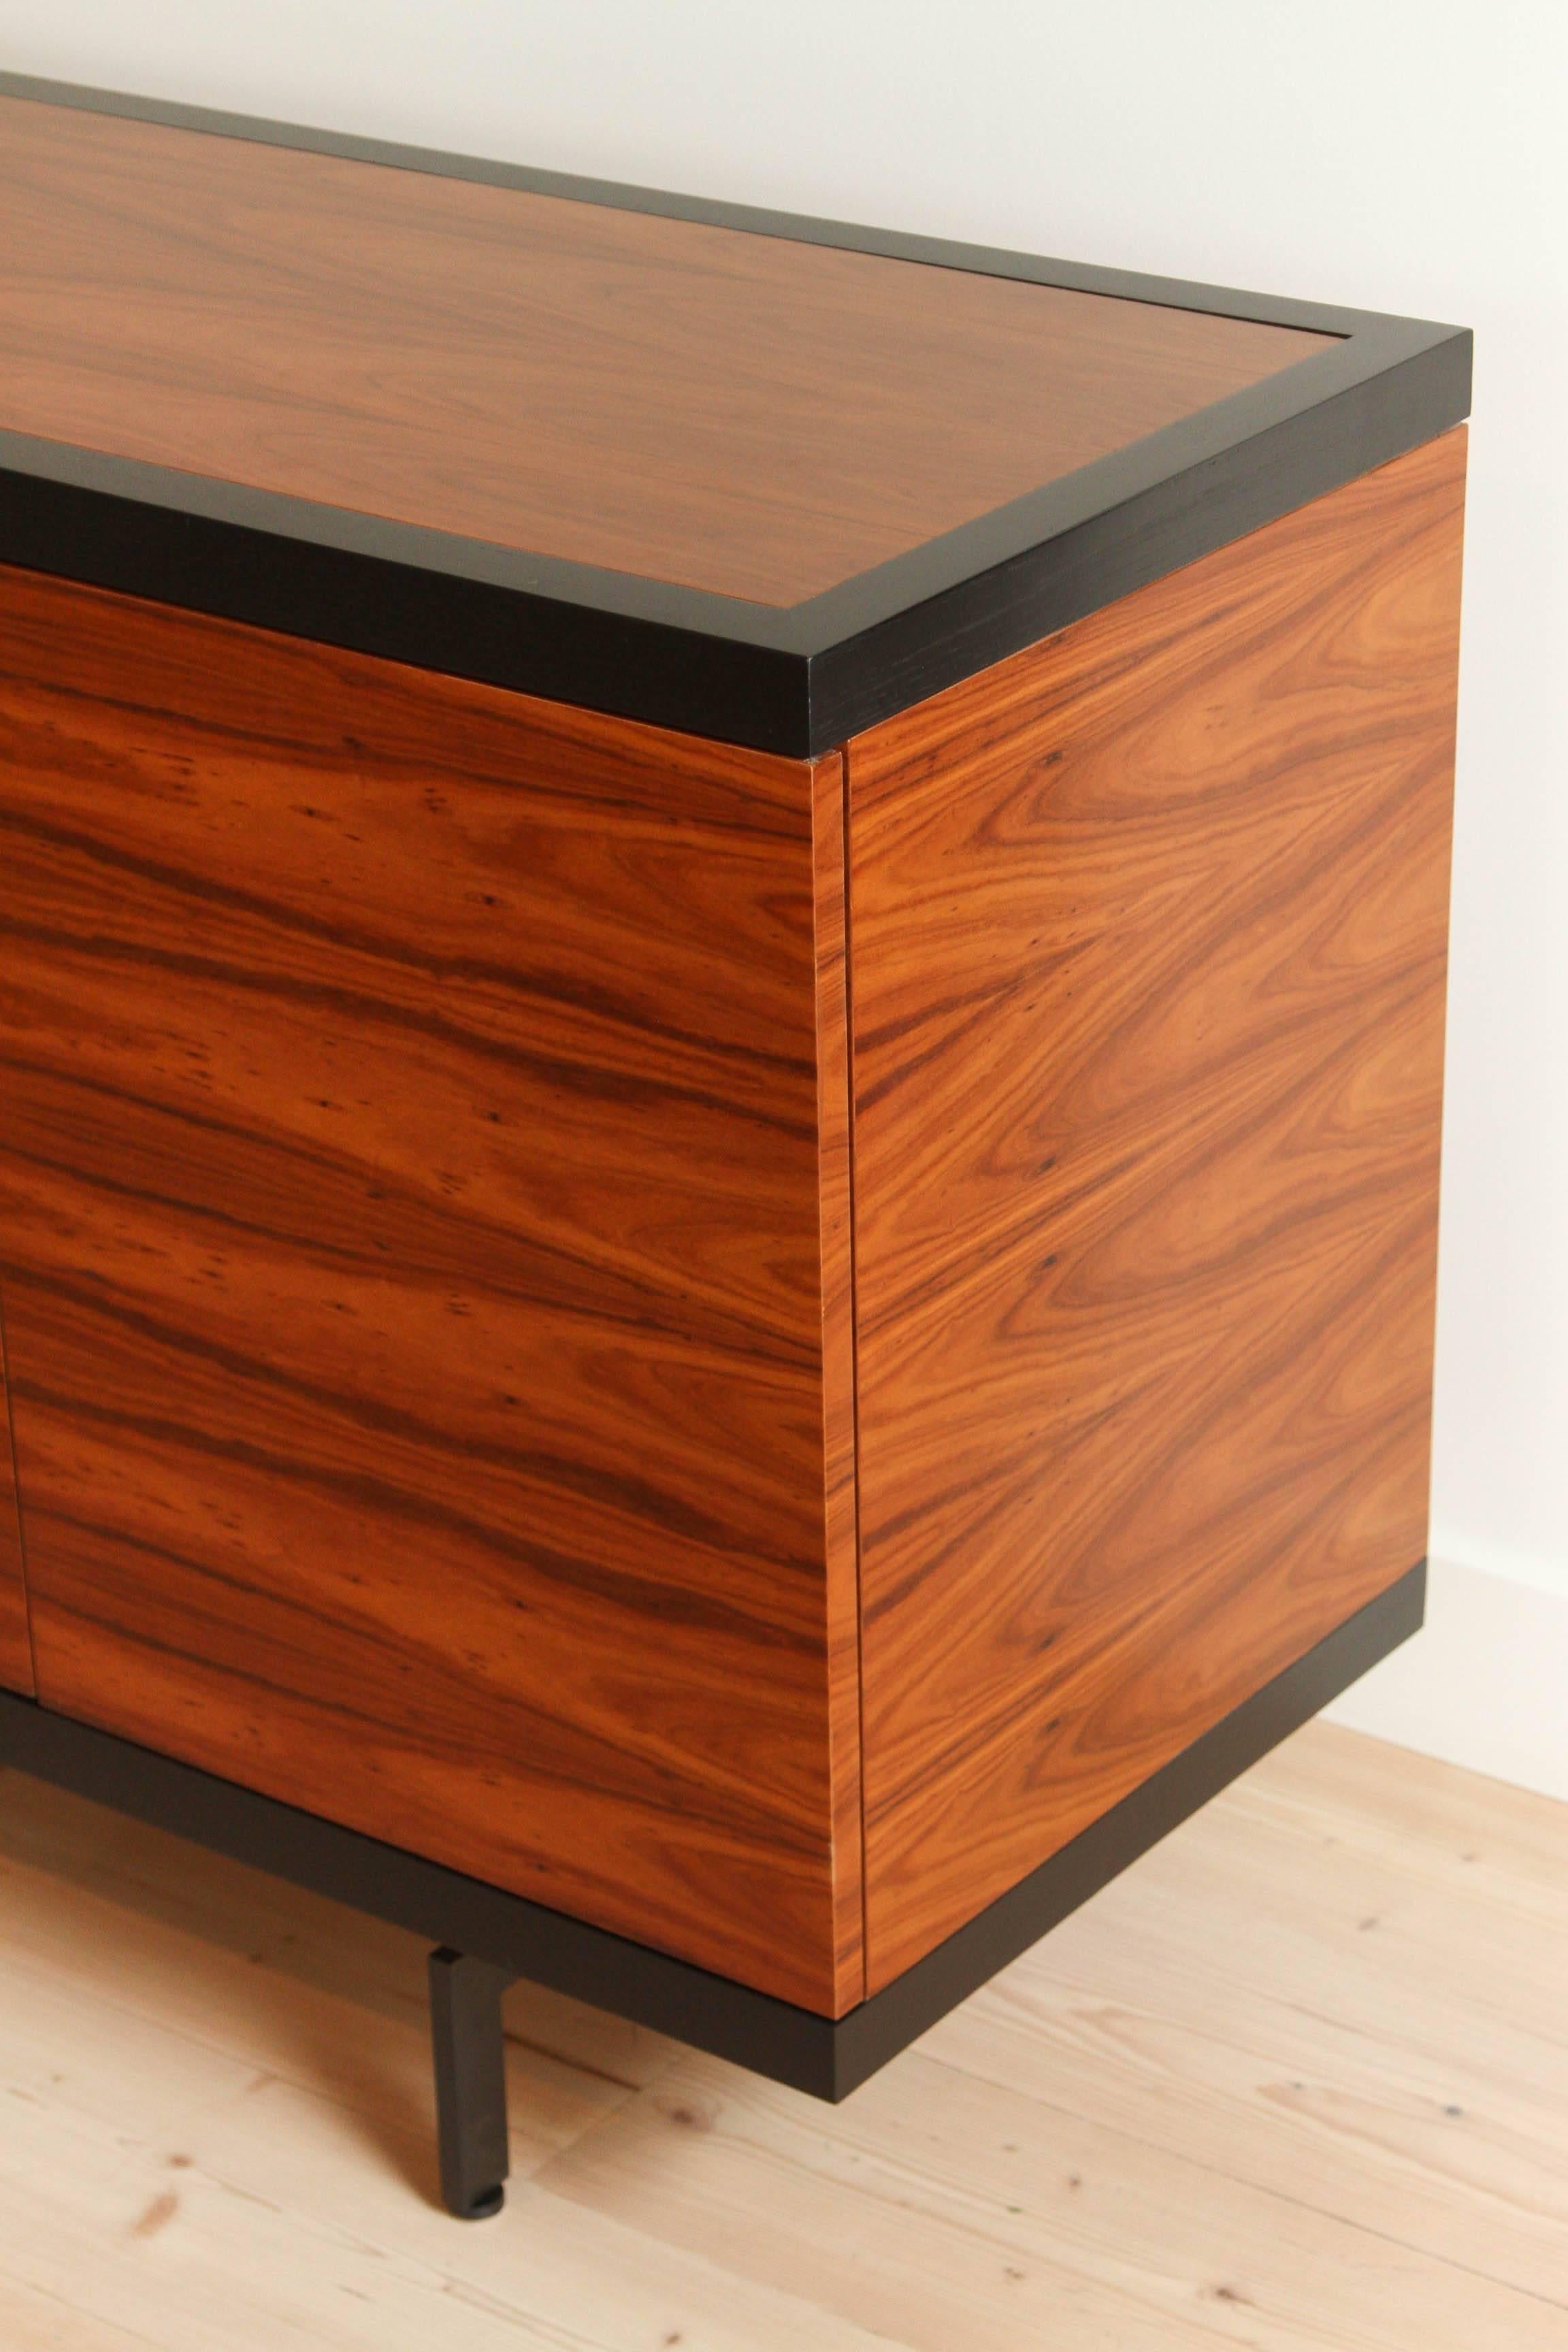 Four-Door Rosewood Dimas Cabinet by Lawson-Fenning 2